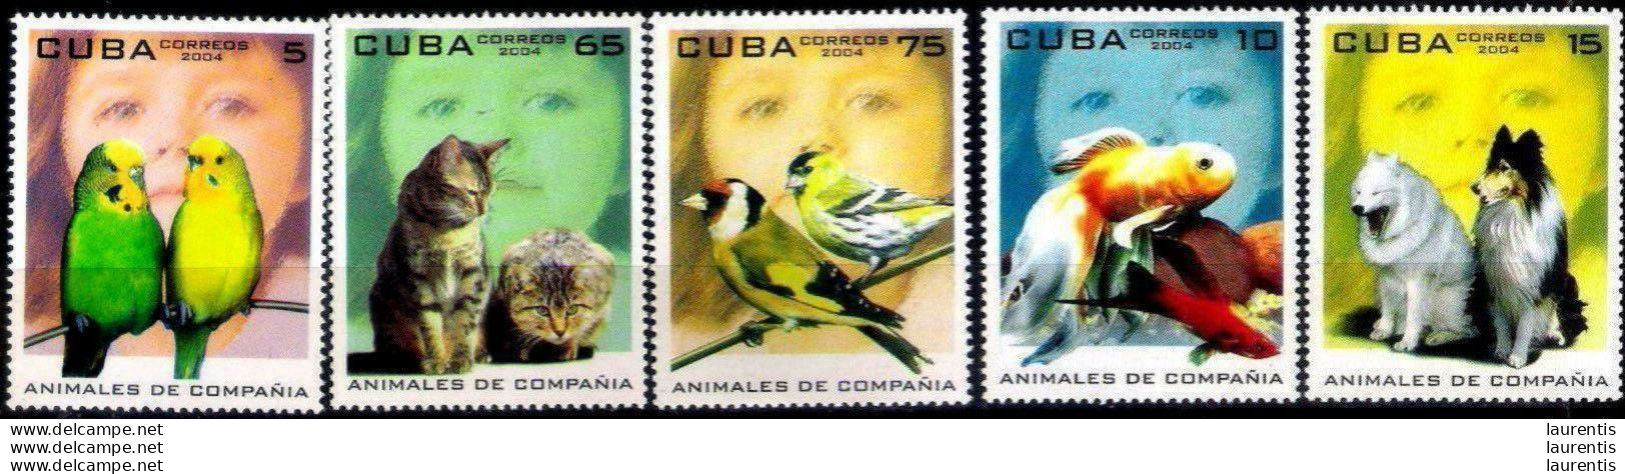 222  Cats - Birds - Fishes - Dogs  - 2004 - MNH - Cb -  1,95 . - Domestic Cats